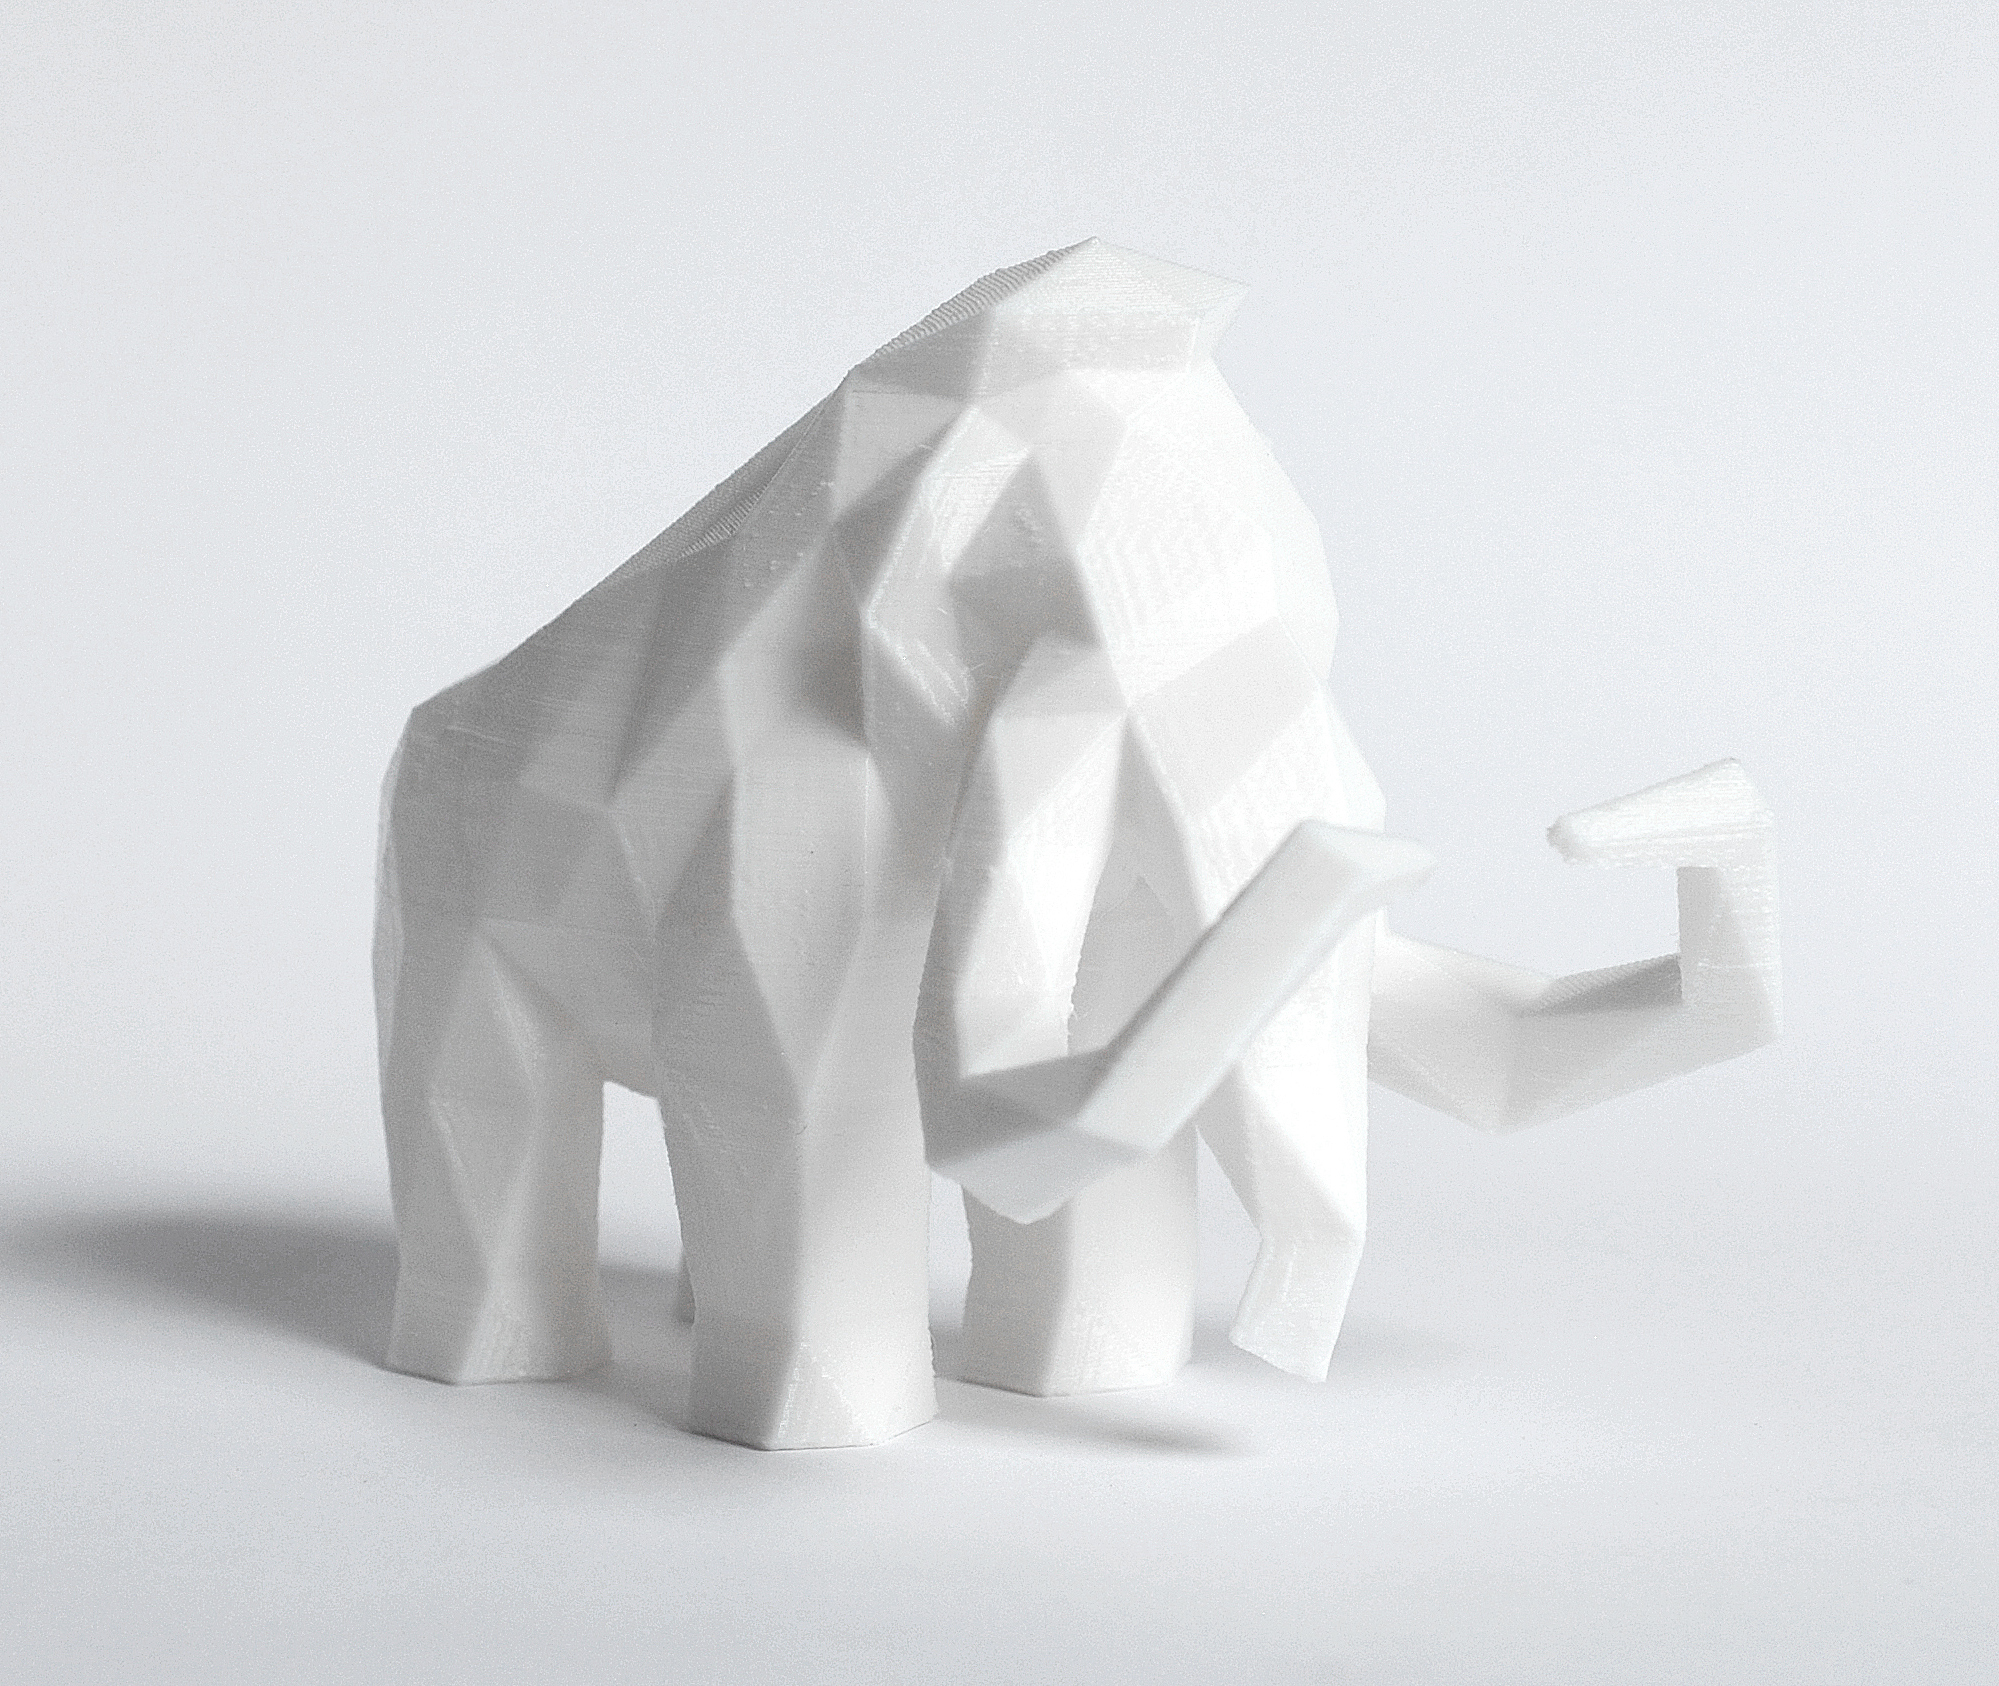 3D Printed Low Poly Animals Collection by FORMBYTE | Pinshape